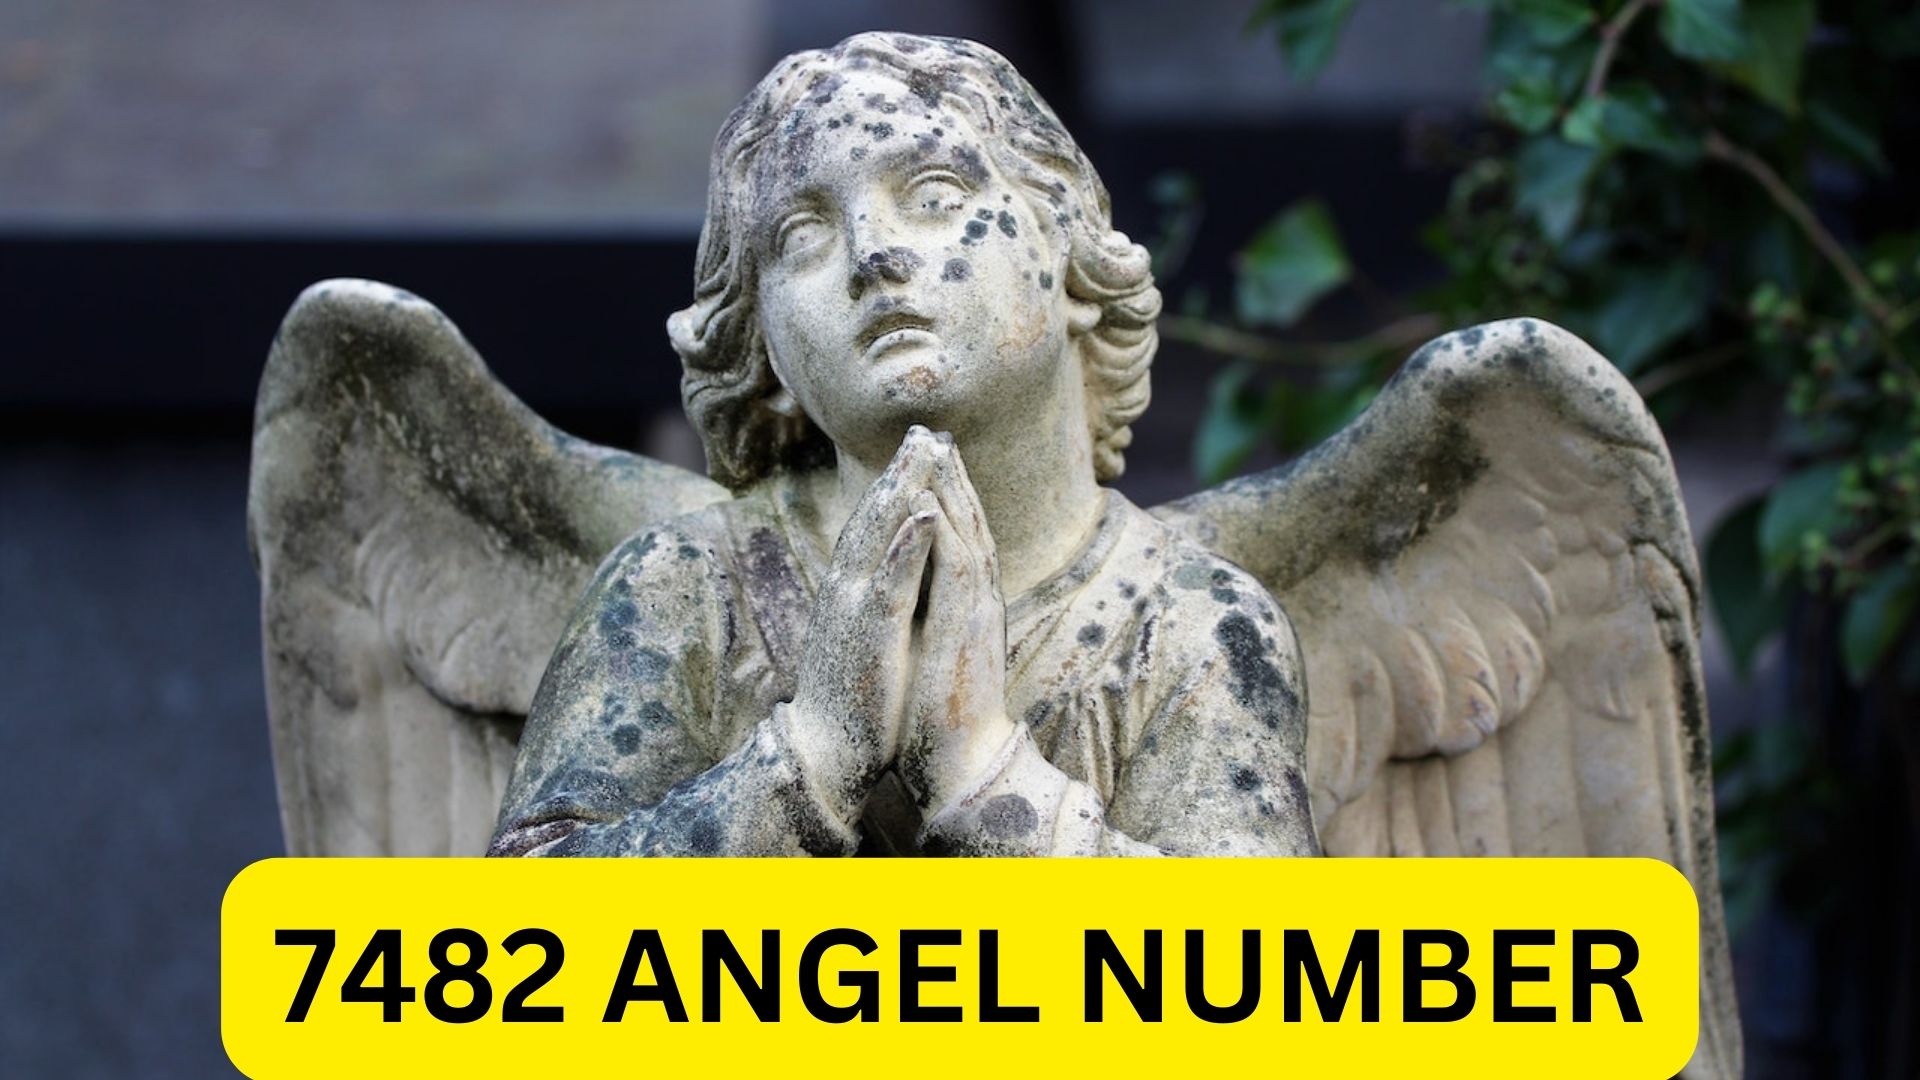 7482 Angel Number - Warning To Stop Being Too Greedy